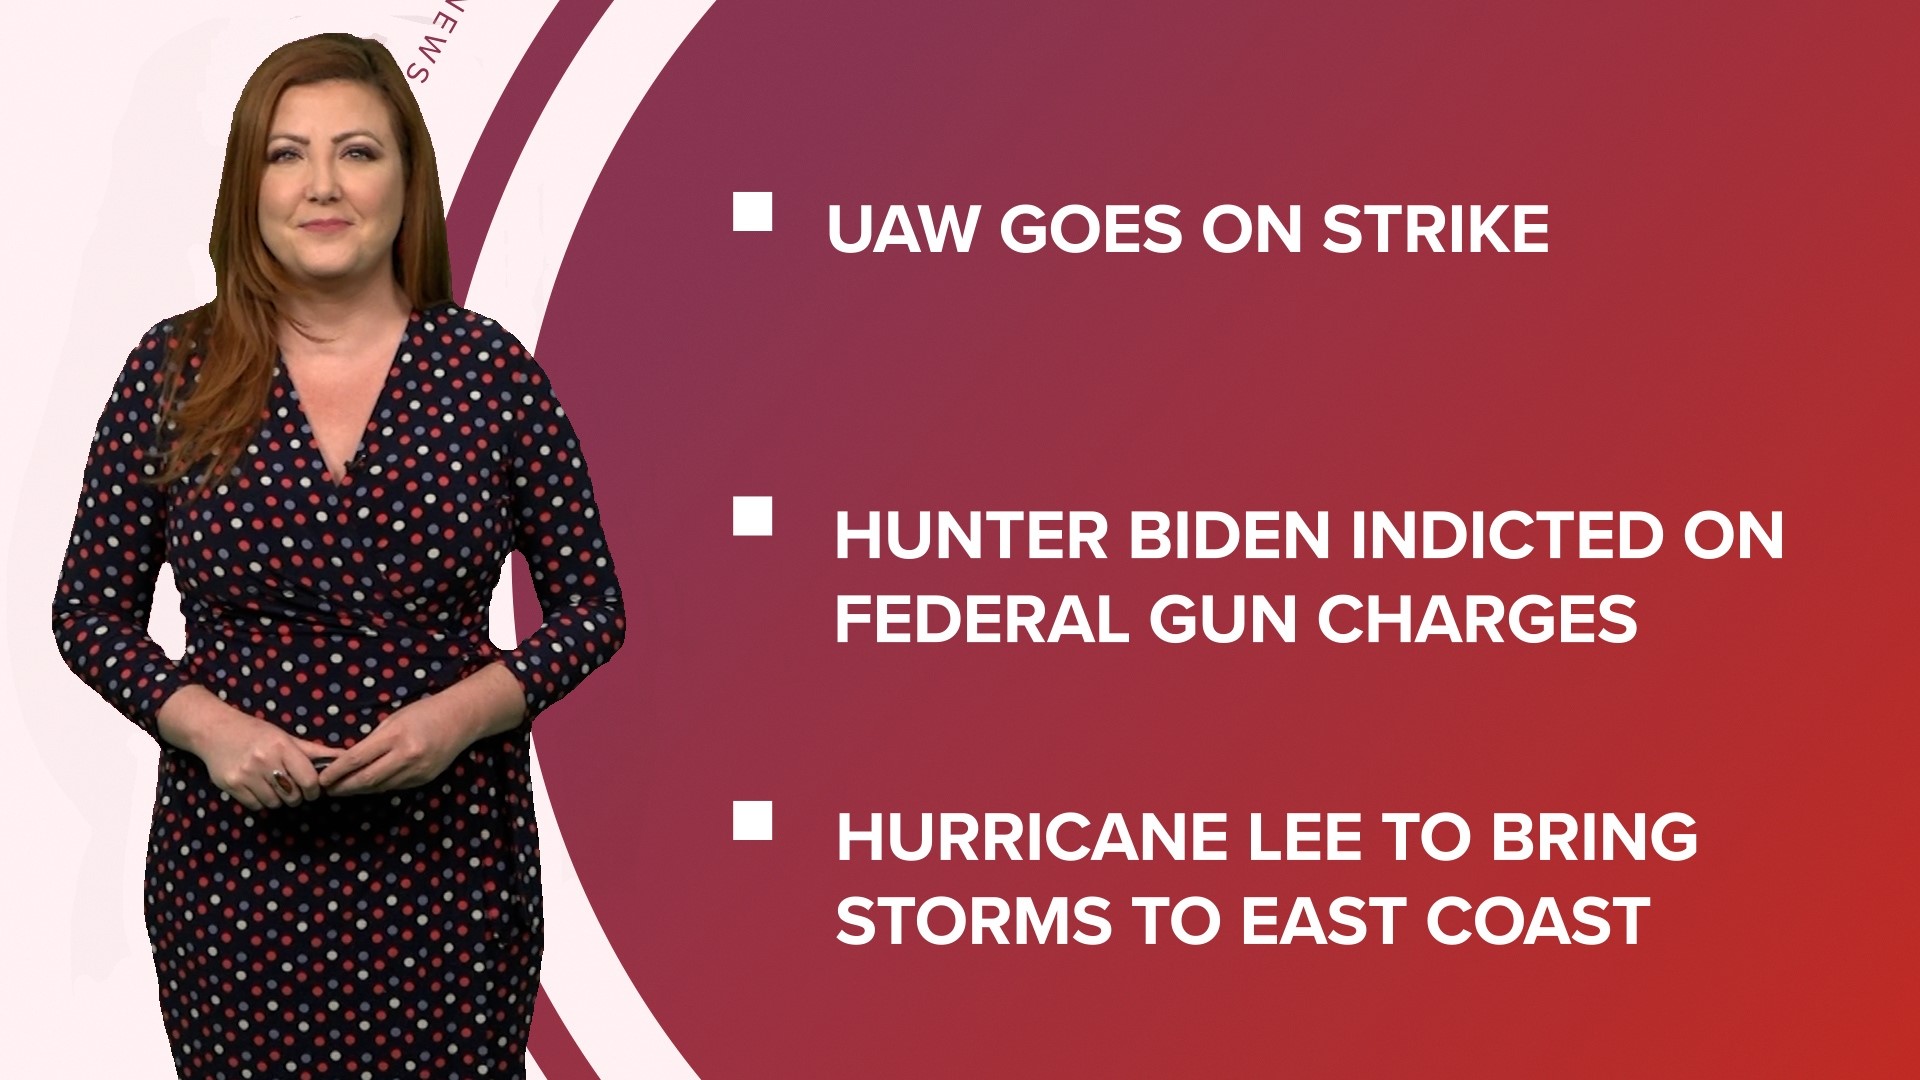 A look at what is happening in the news from UAW going on strike to Hunter Biden facing charges and the start of Hispanic heritage month.